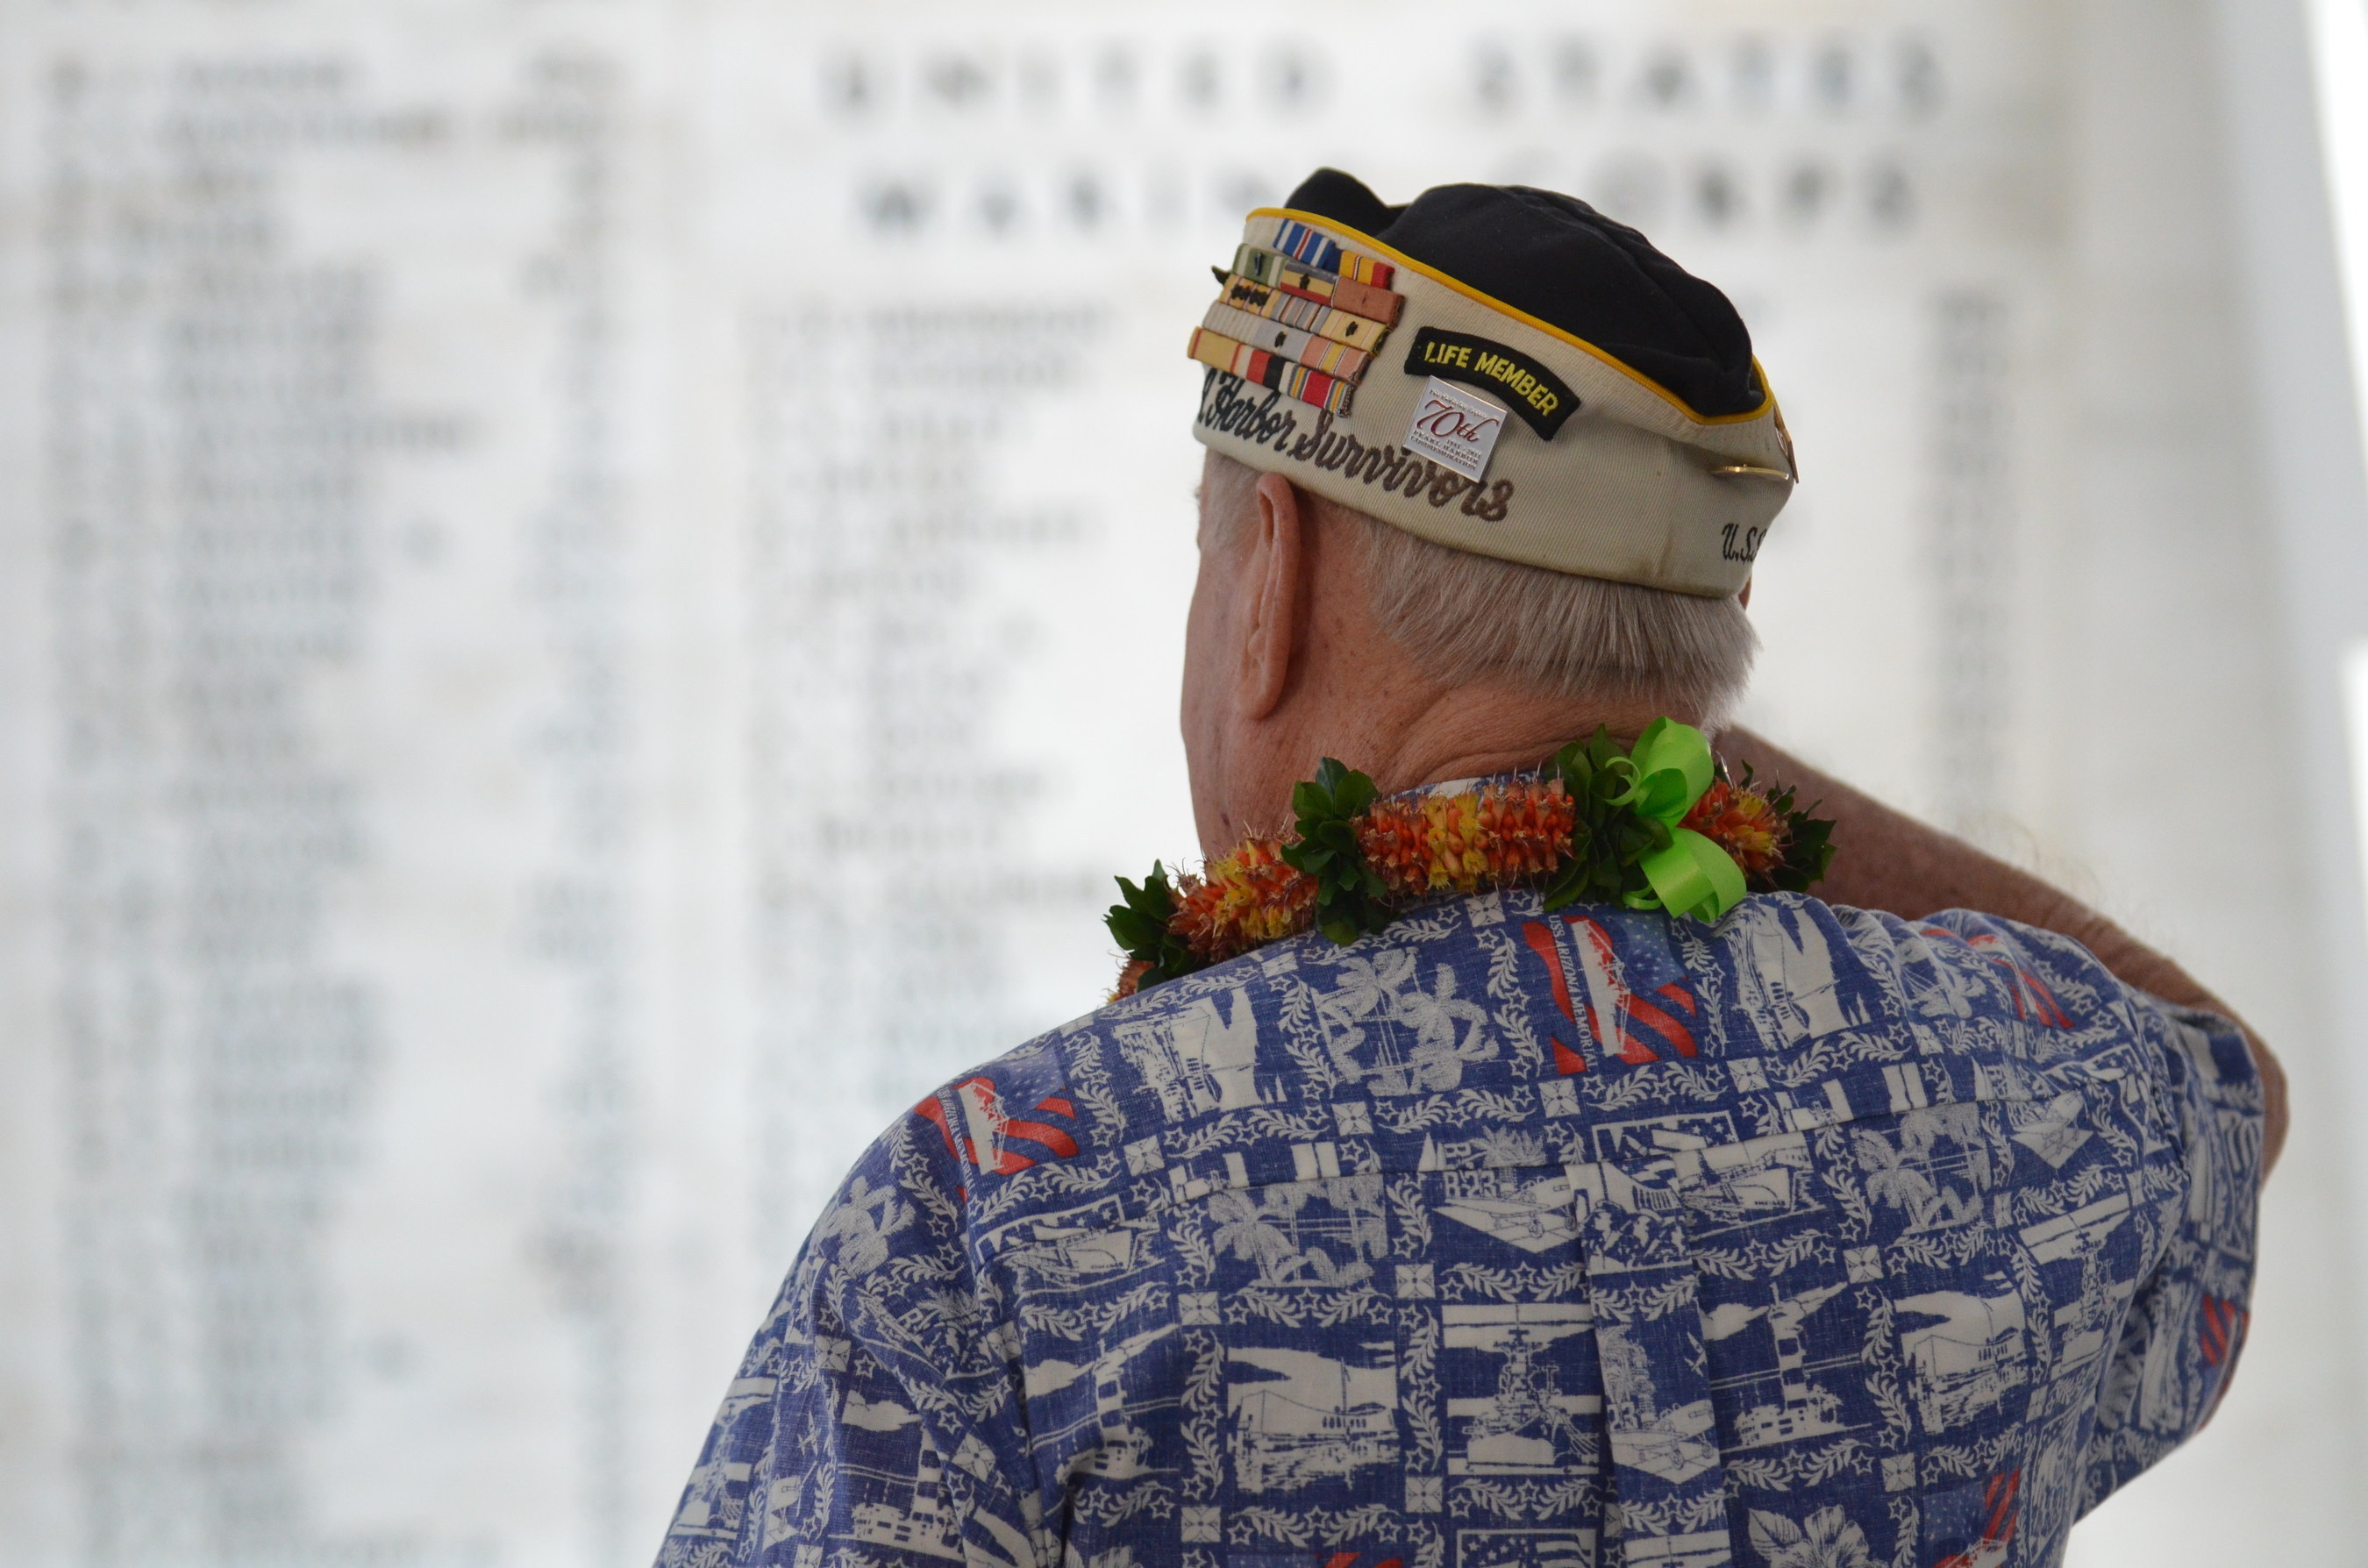 On Sunday, December 7, 2014 the National Park Service and the U.S. Navy will host a joint memorial ceremony commemorating the 73rd anniversary of the attack on Pearl Harbor. The ceremony will take place on the main lawn of the Pearl Harbor Visitor Center, looking directly out to the USS Arizona Memorial, at the World War II Valor in the Pacific National Monument. The ceremony will be attended by more than 2,500 guests, including Pearl Harbor survivors and WWII veterans, and will be broadcast via live...